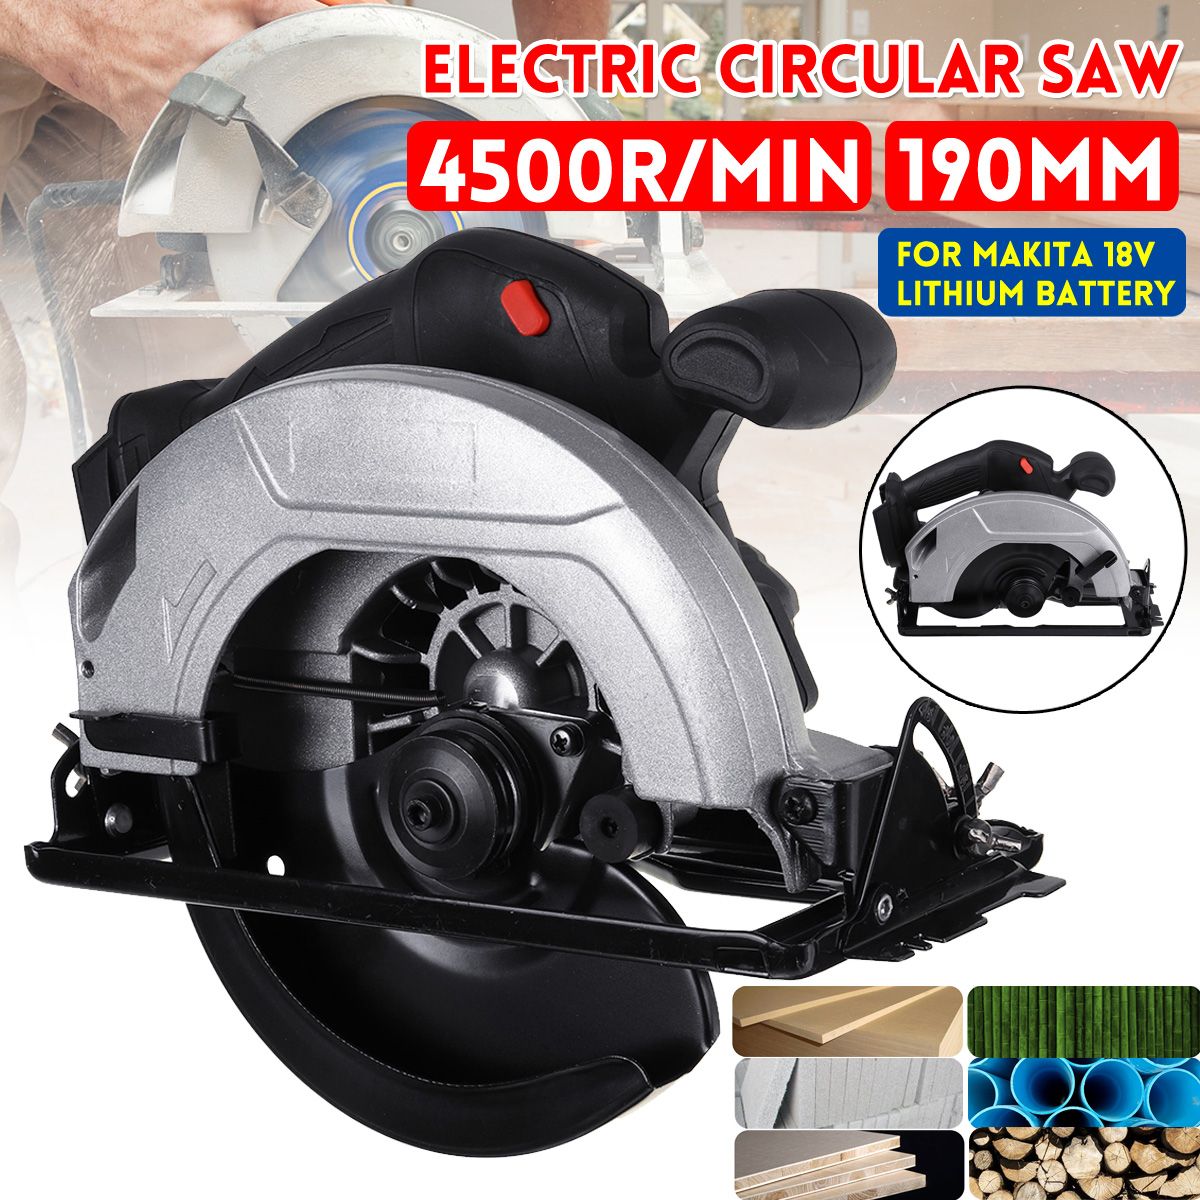 Electric-Laser-Circular-Saw-Corded-Cutting-Tool-For-Makita-18V-Lithium-Battery-1734554